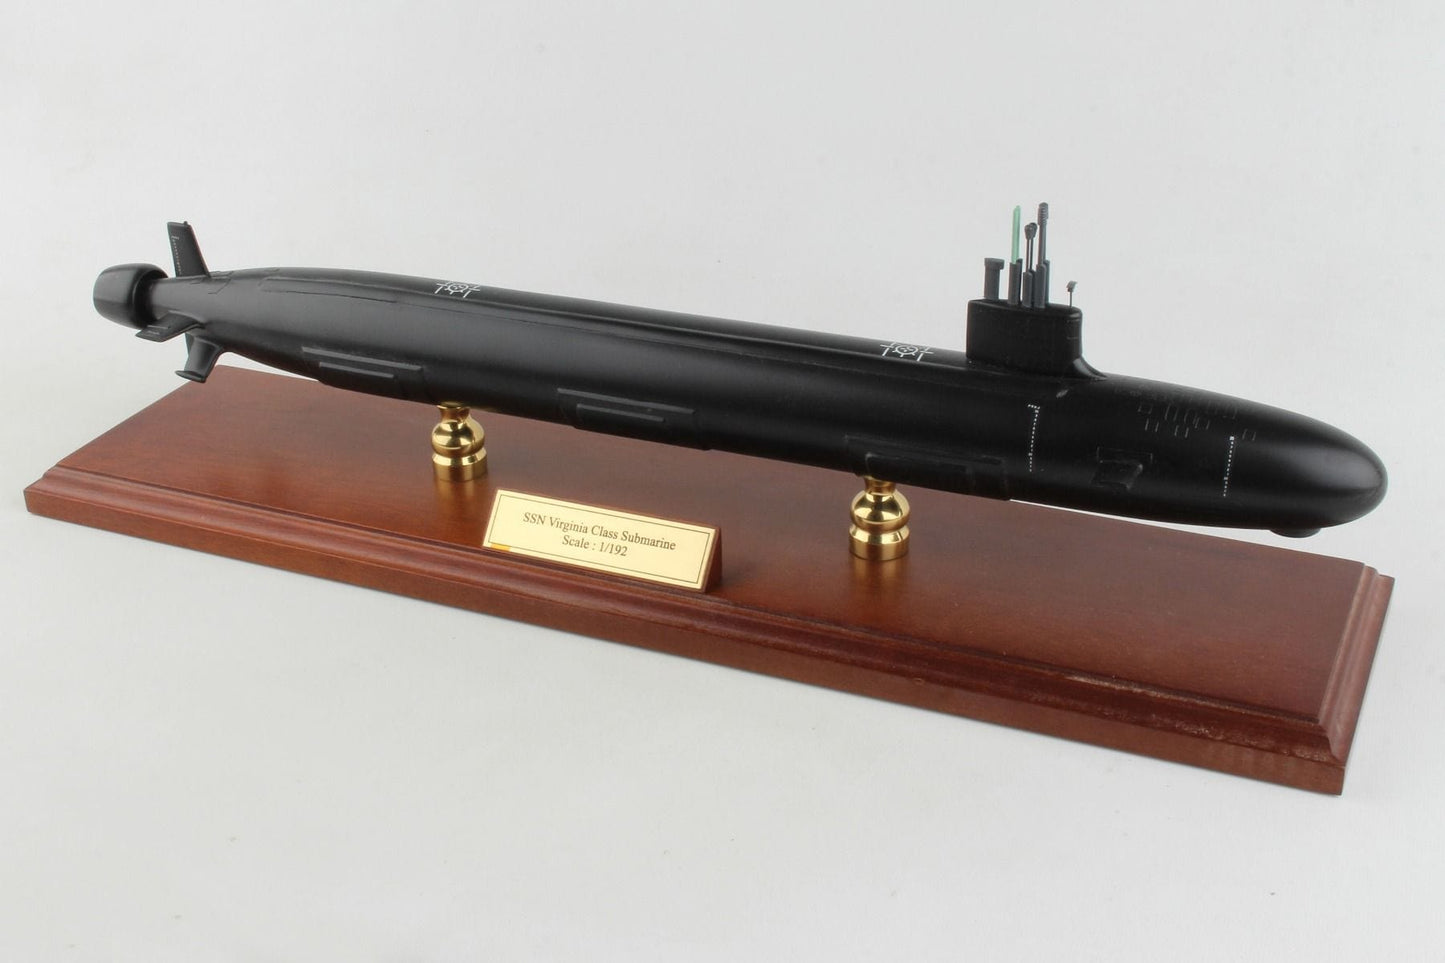 ALDO Creative Arts Collectibles Scale Model Length is 23 1/4 inches and beam is 3 1/4 inches  Scale 1/92 / NEW / Wood and Resin US Navy Virginia Class Submarine SSN-774 MBSVC1TR Large Model Assembled